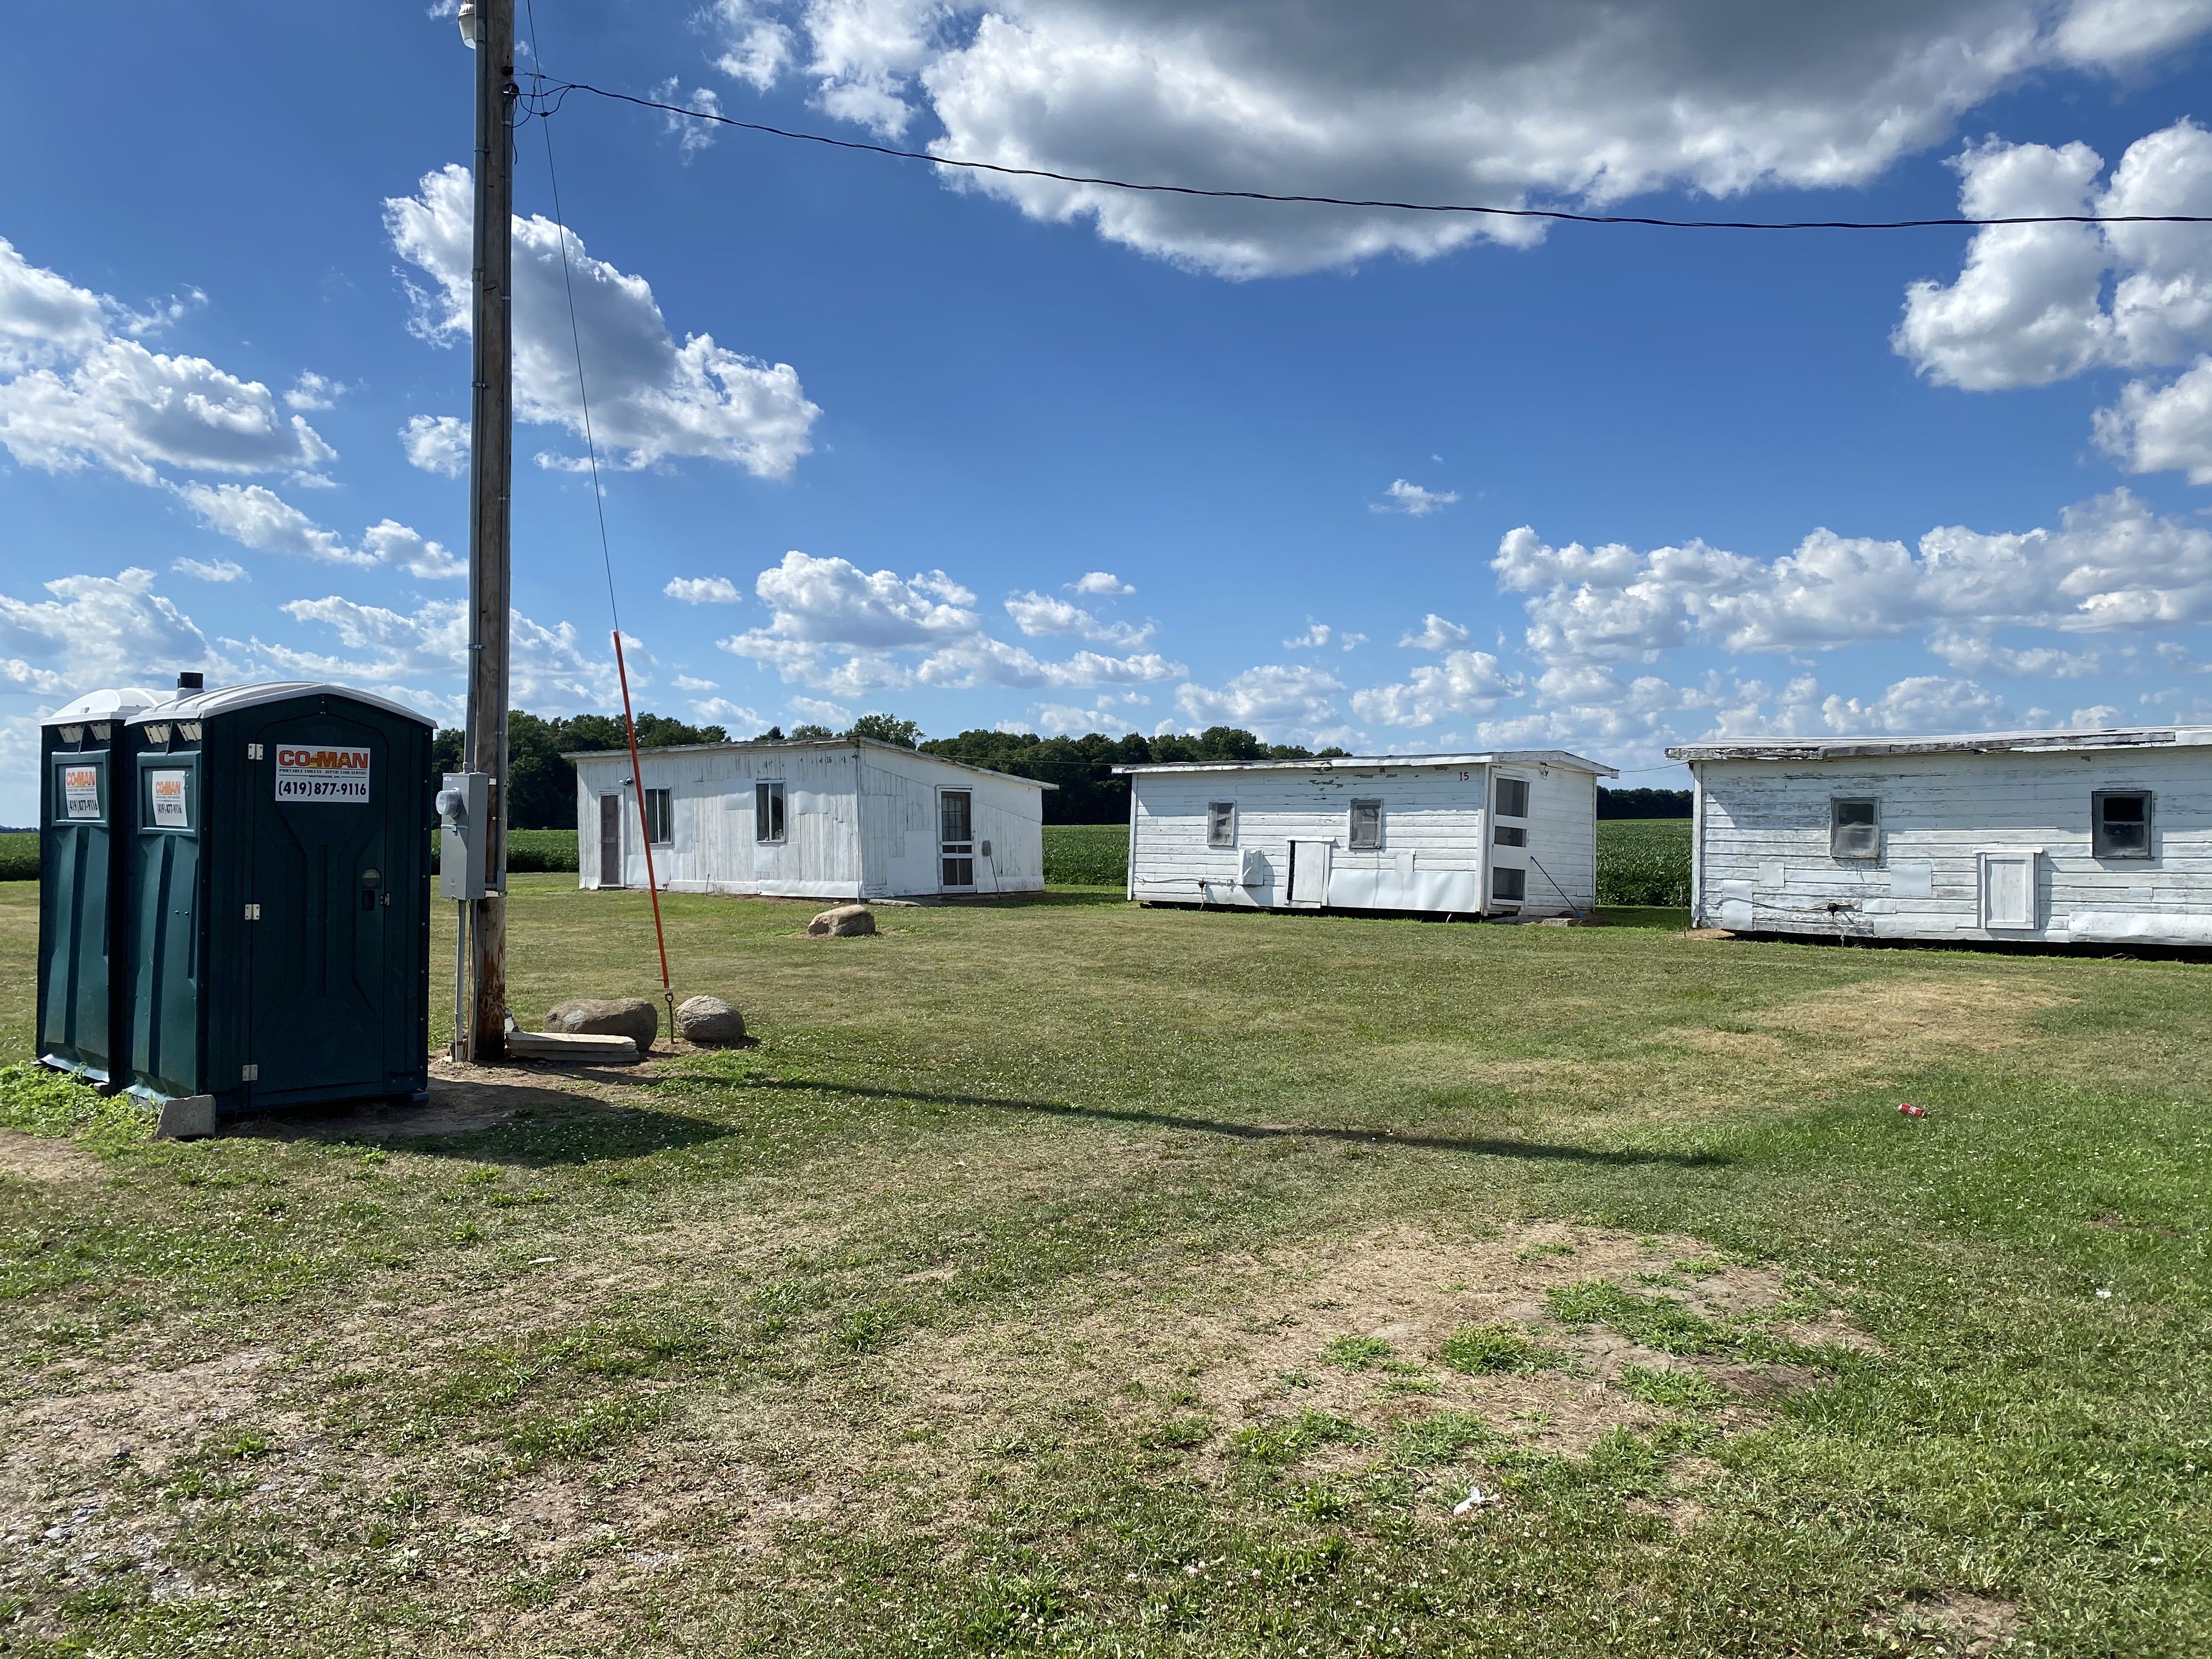 Between four to six migrant farmworkers live in housing like the one pictured above. Image by Areeba Shah. United States, 2020.